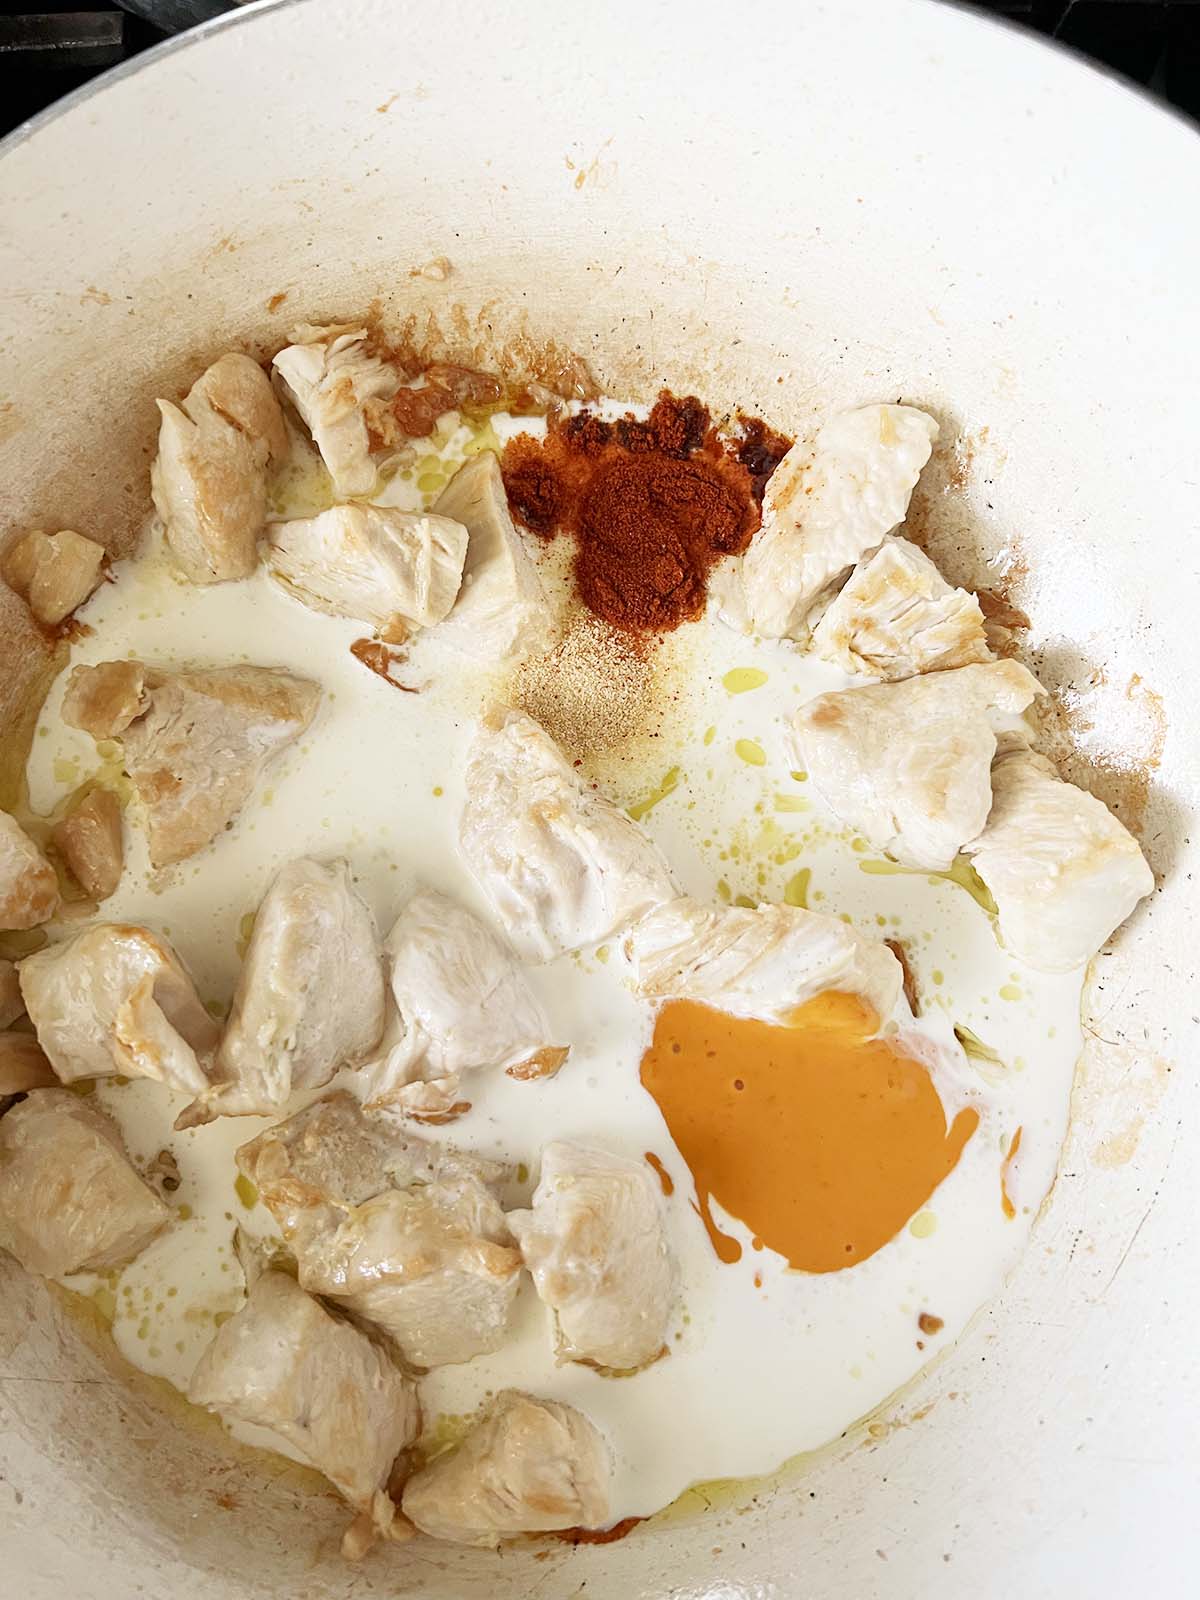 Adding spices and cream to chicken